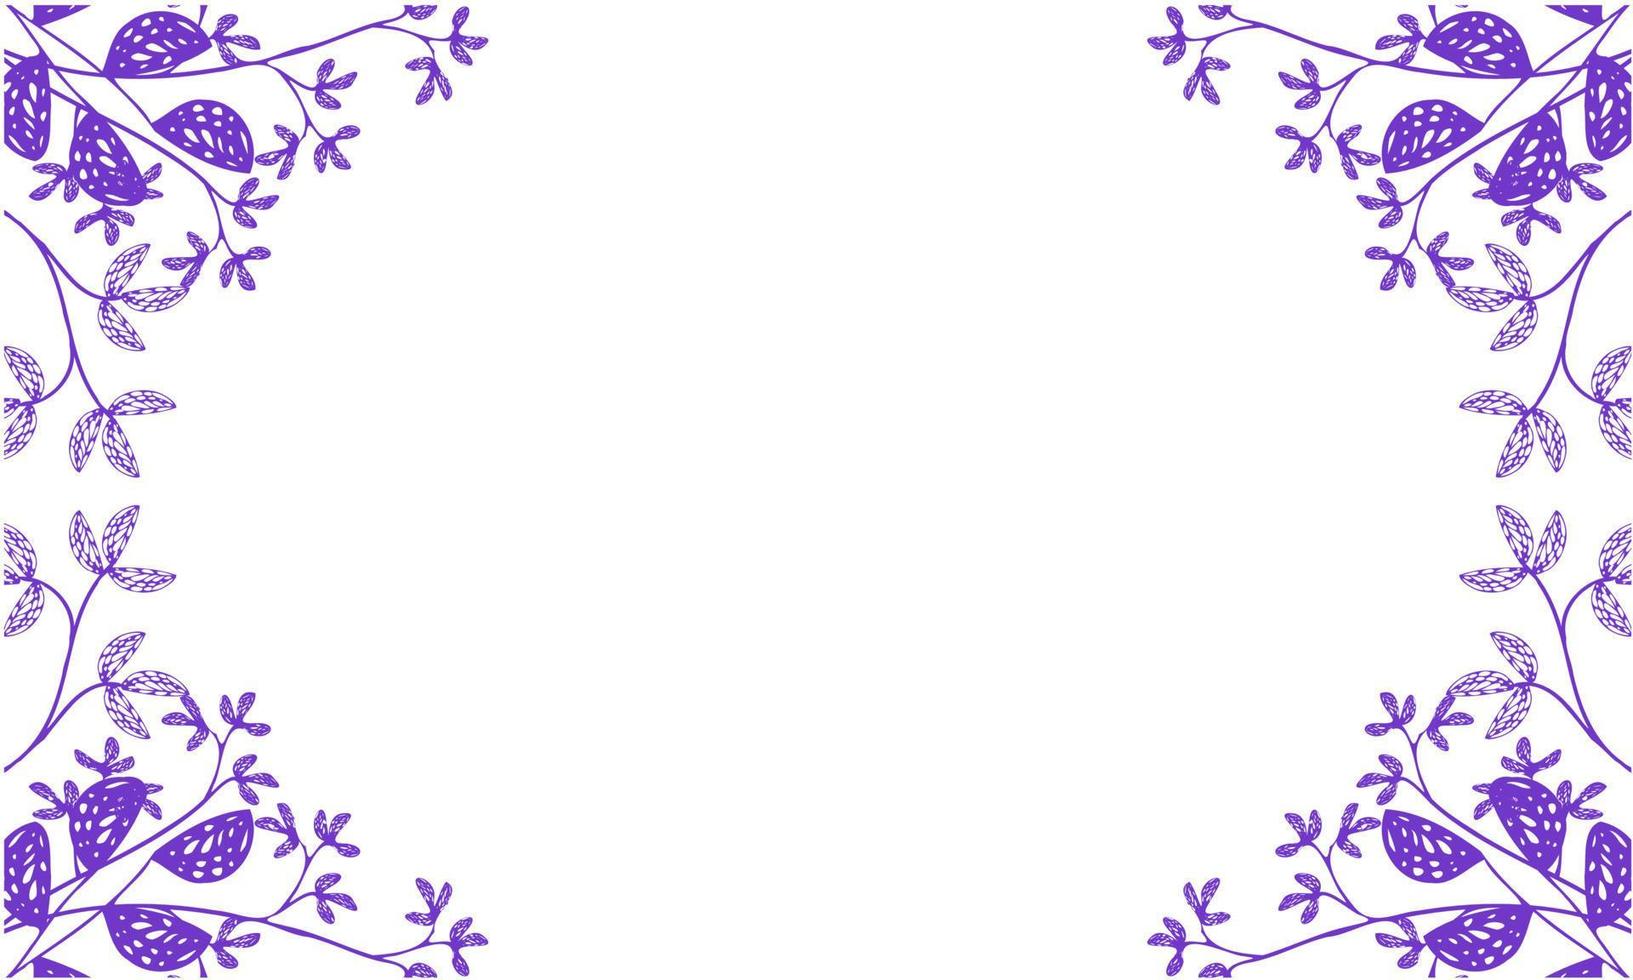 floral frame silhouette vector